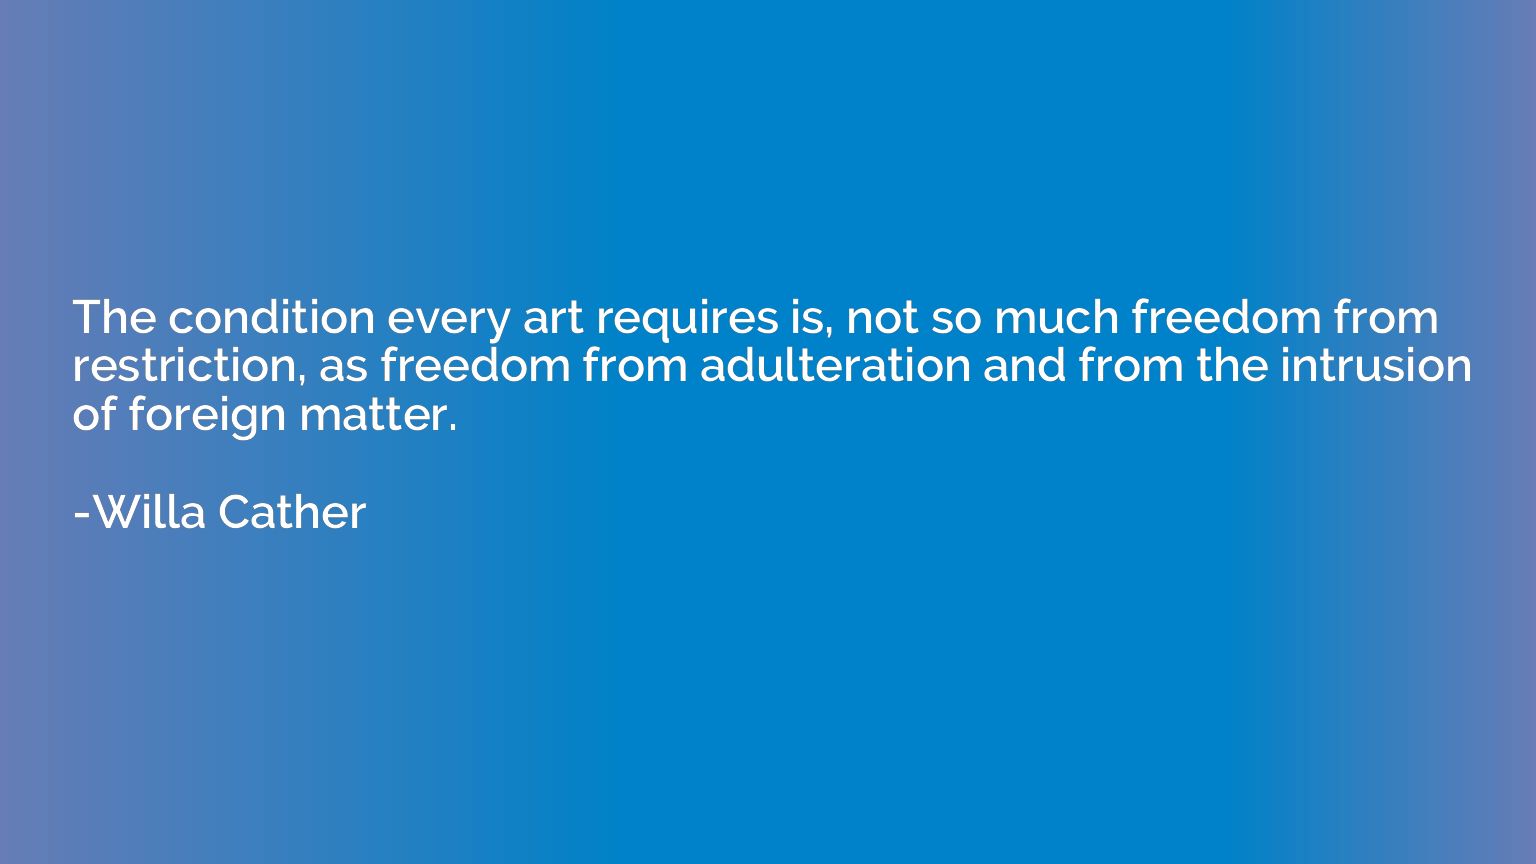 The condition every art requires is, not so much freedom fro